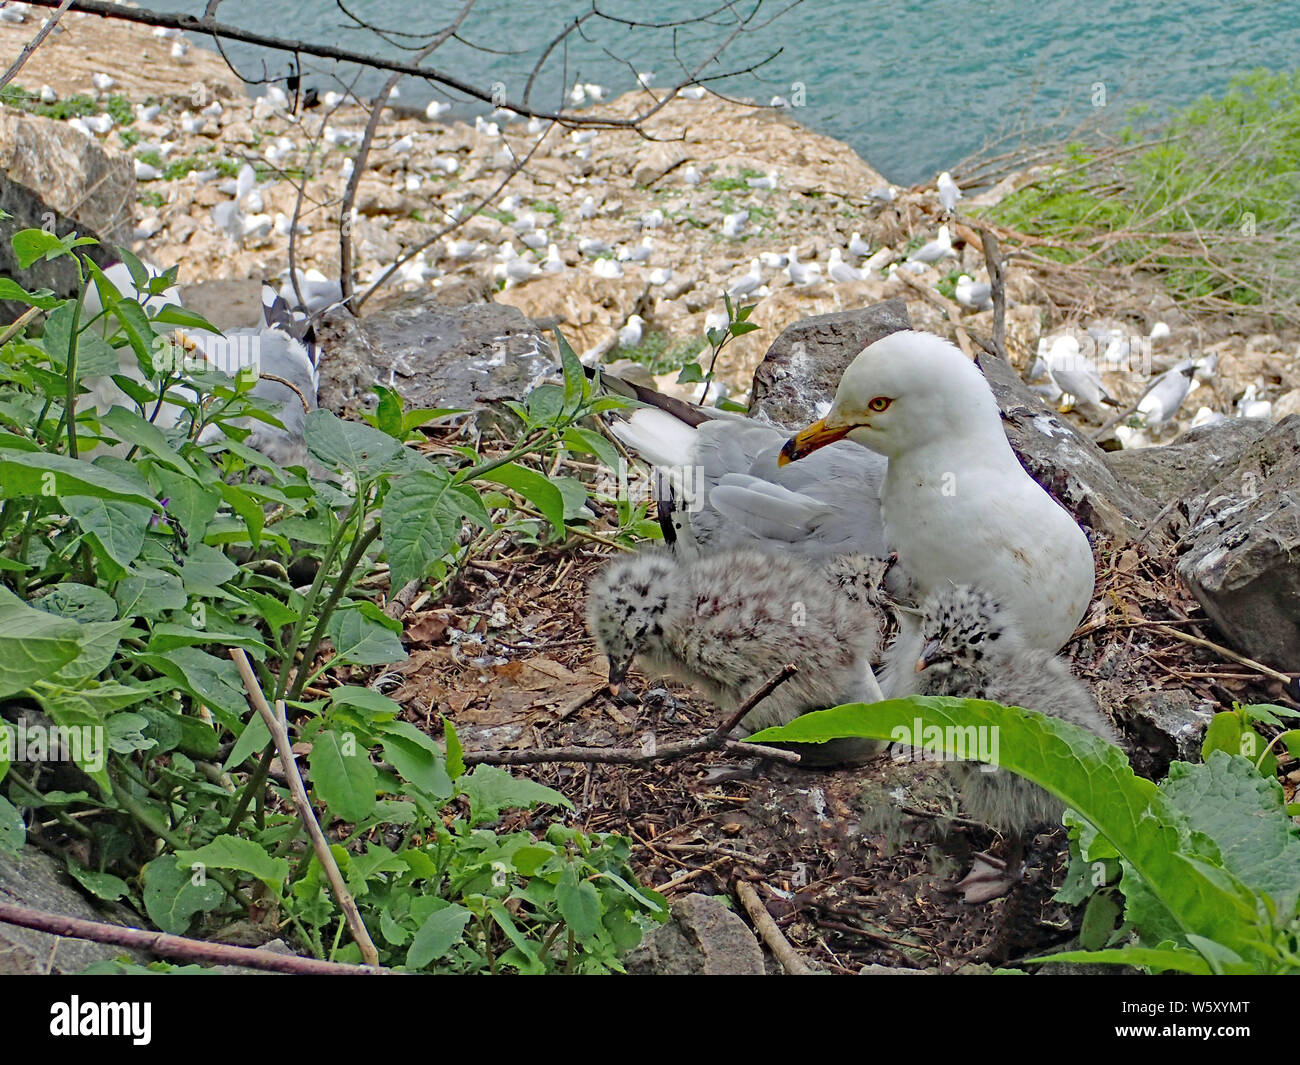 Grey and white ring-billed seagull with bright red eye and yellow beak, nesting 3 fluffy black spotted chicks, with large colony in background. Stock Photo